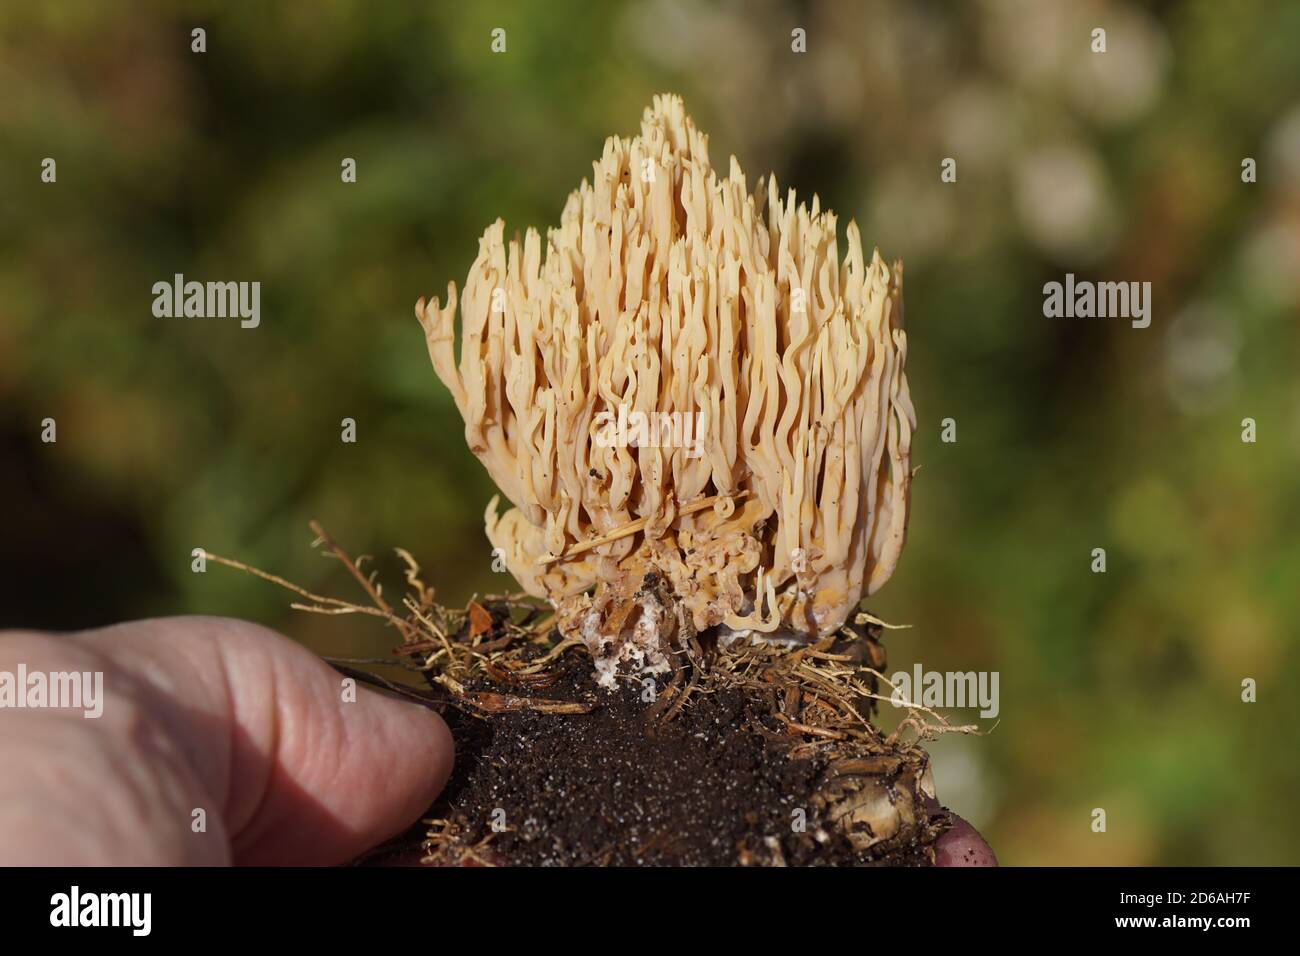 Holding a Strict-branch coral (Ramaria stricta) a coral fungus of the family Gomphaceae in a Dutch garden in Autumn. Netherlands, October Stock Photo